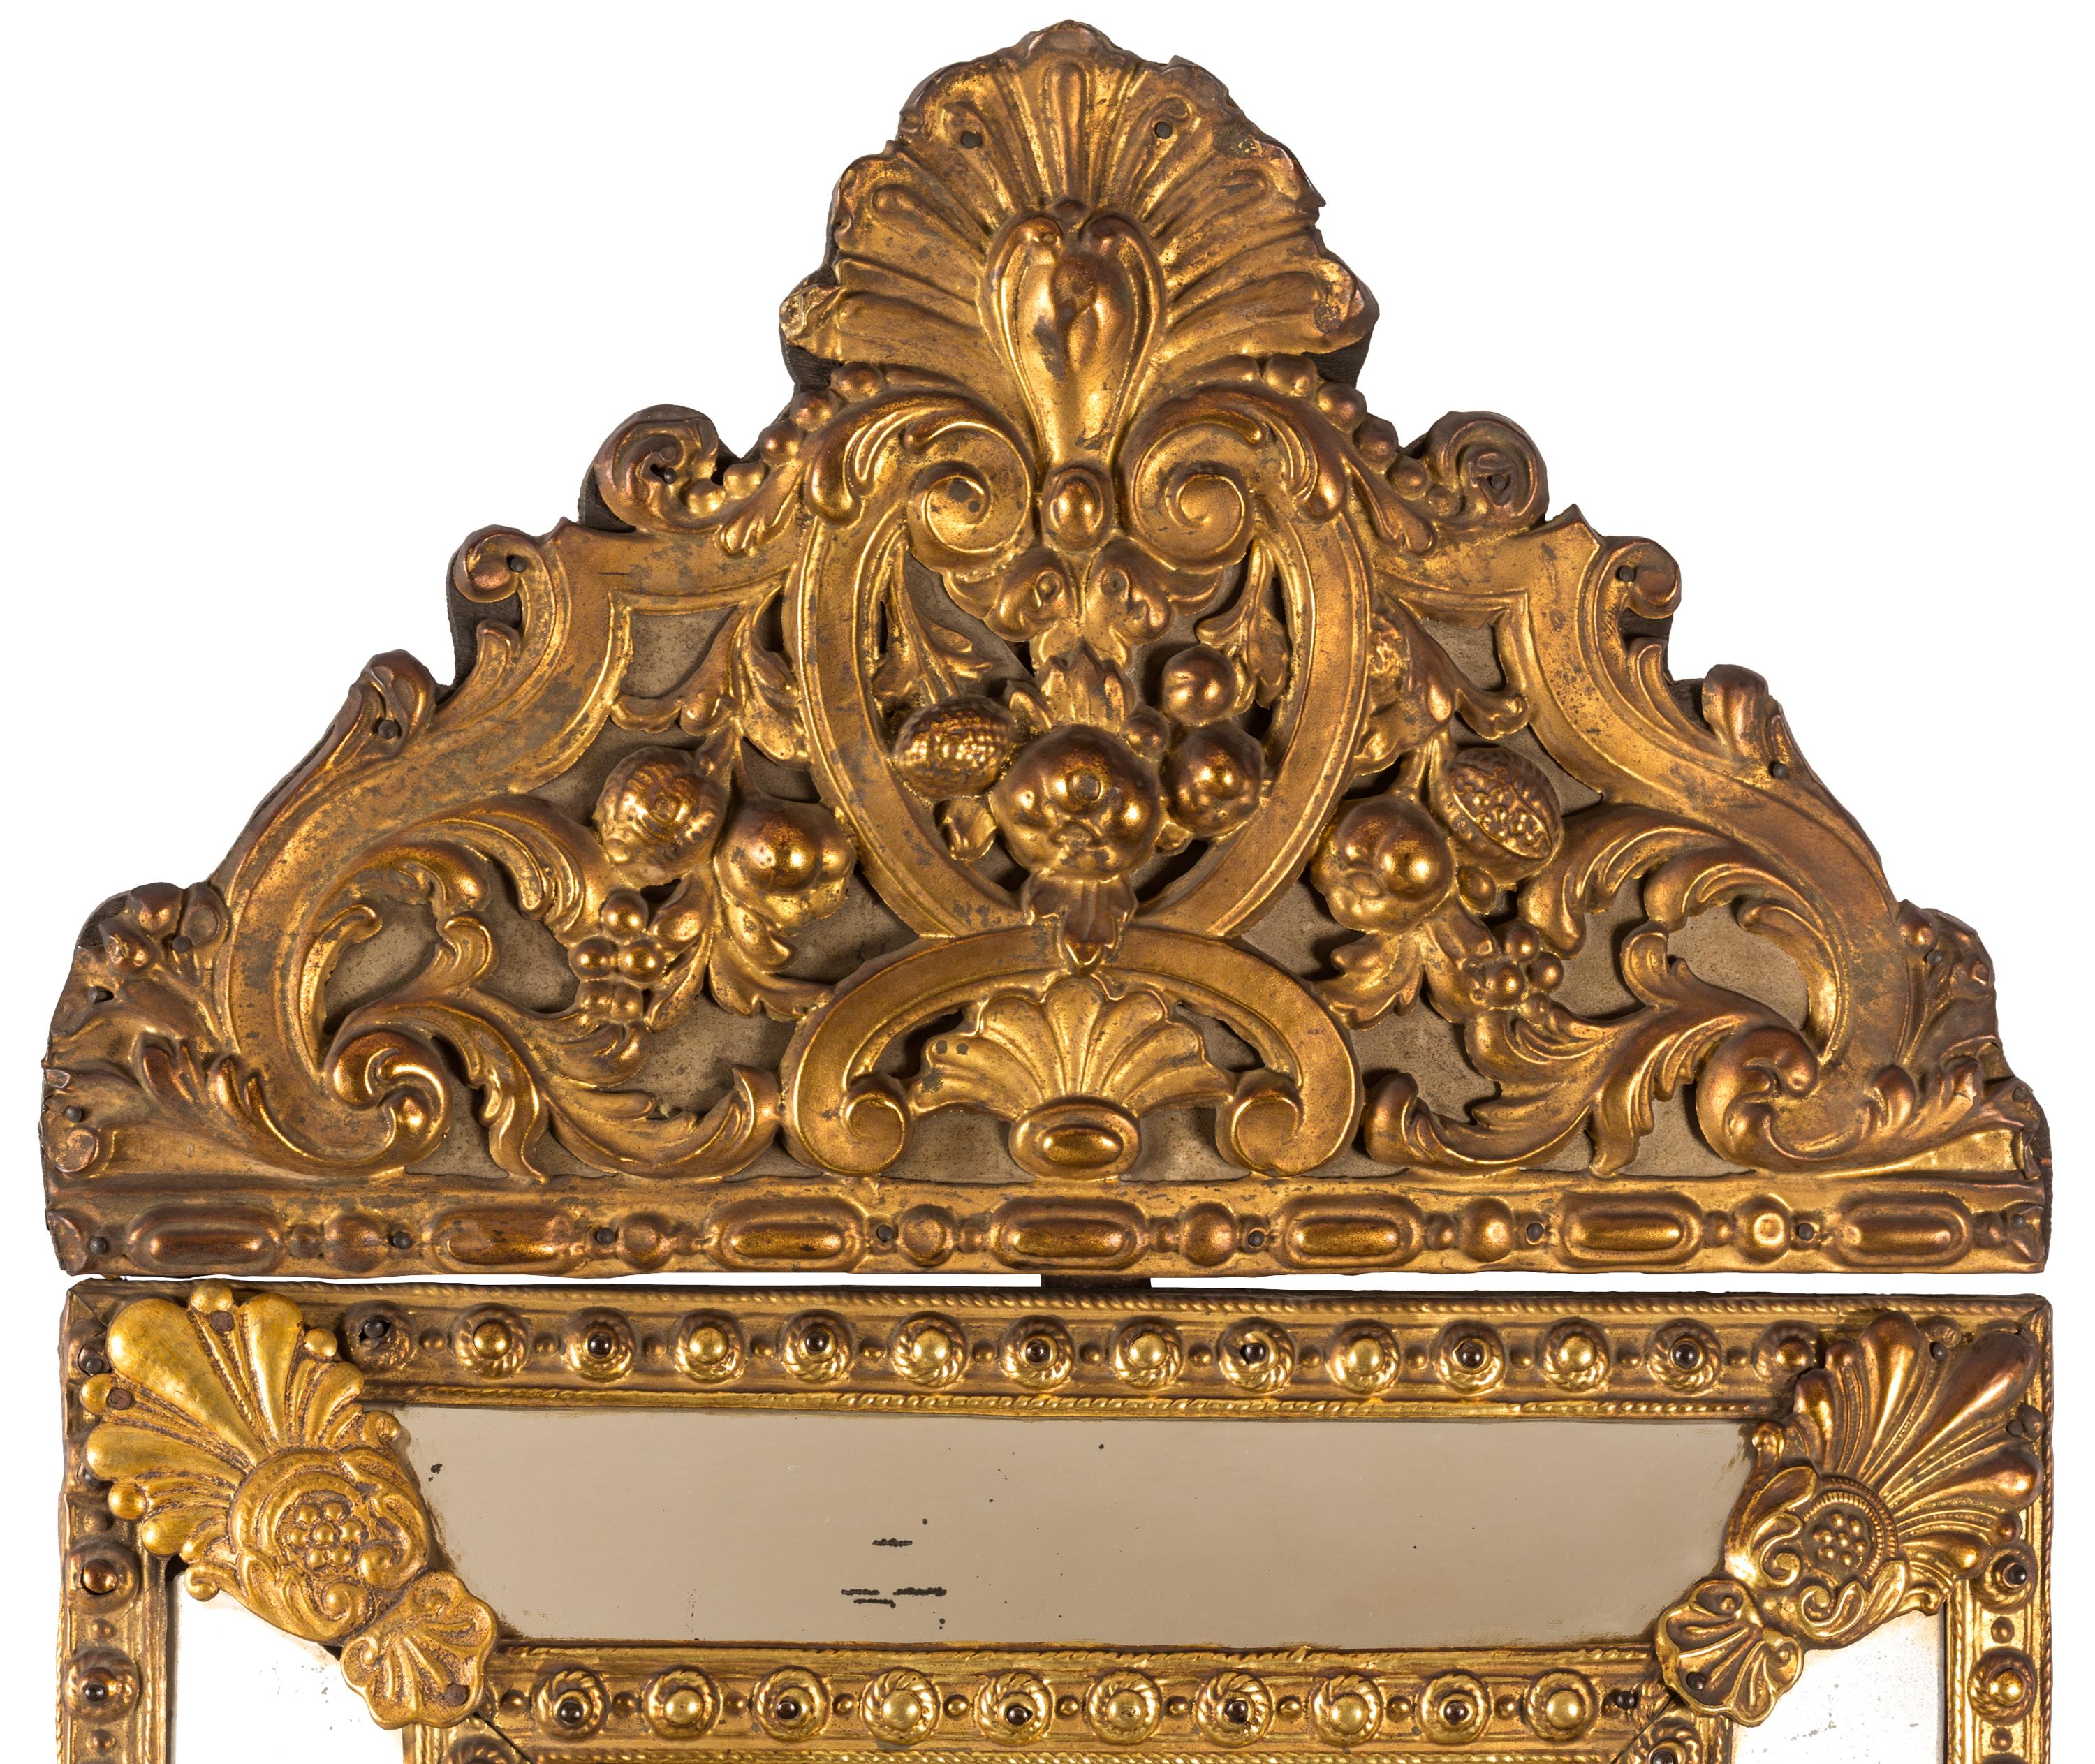 A 19th century Dutch Baroque style mirror with beveled central glass and gold colored metal frame with embossed, sculptural decoration. The raised designs were handcrafted using a technique known as “Repoussé” in which the metal (in this case either